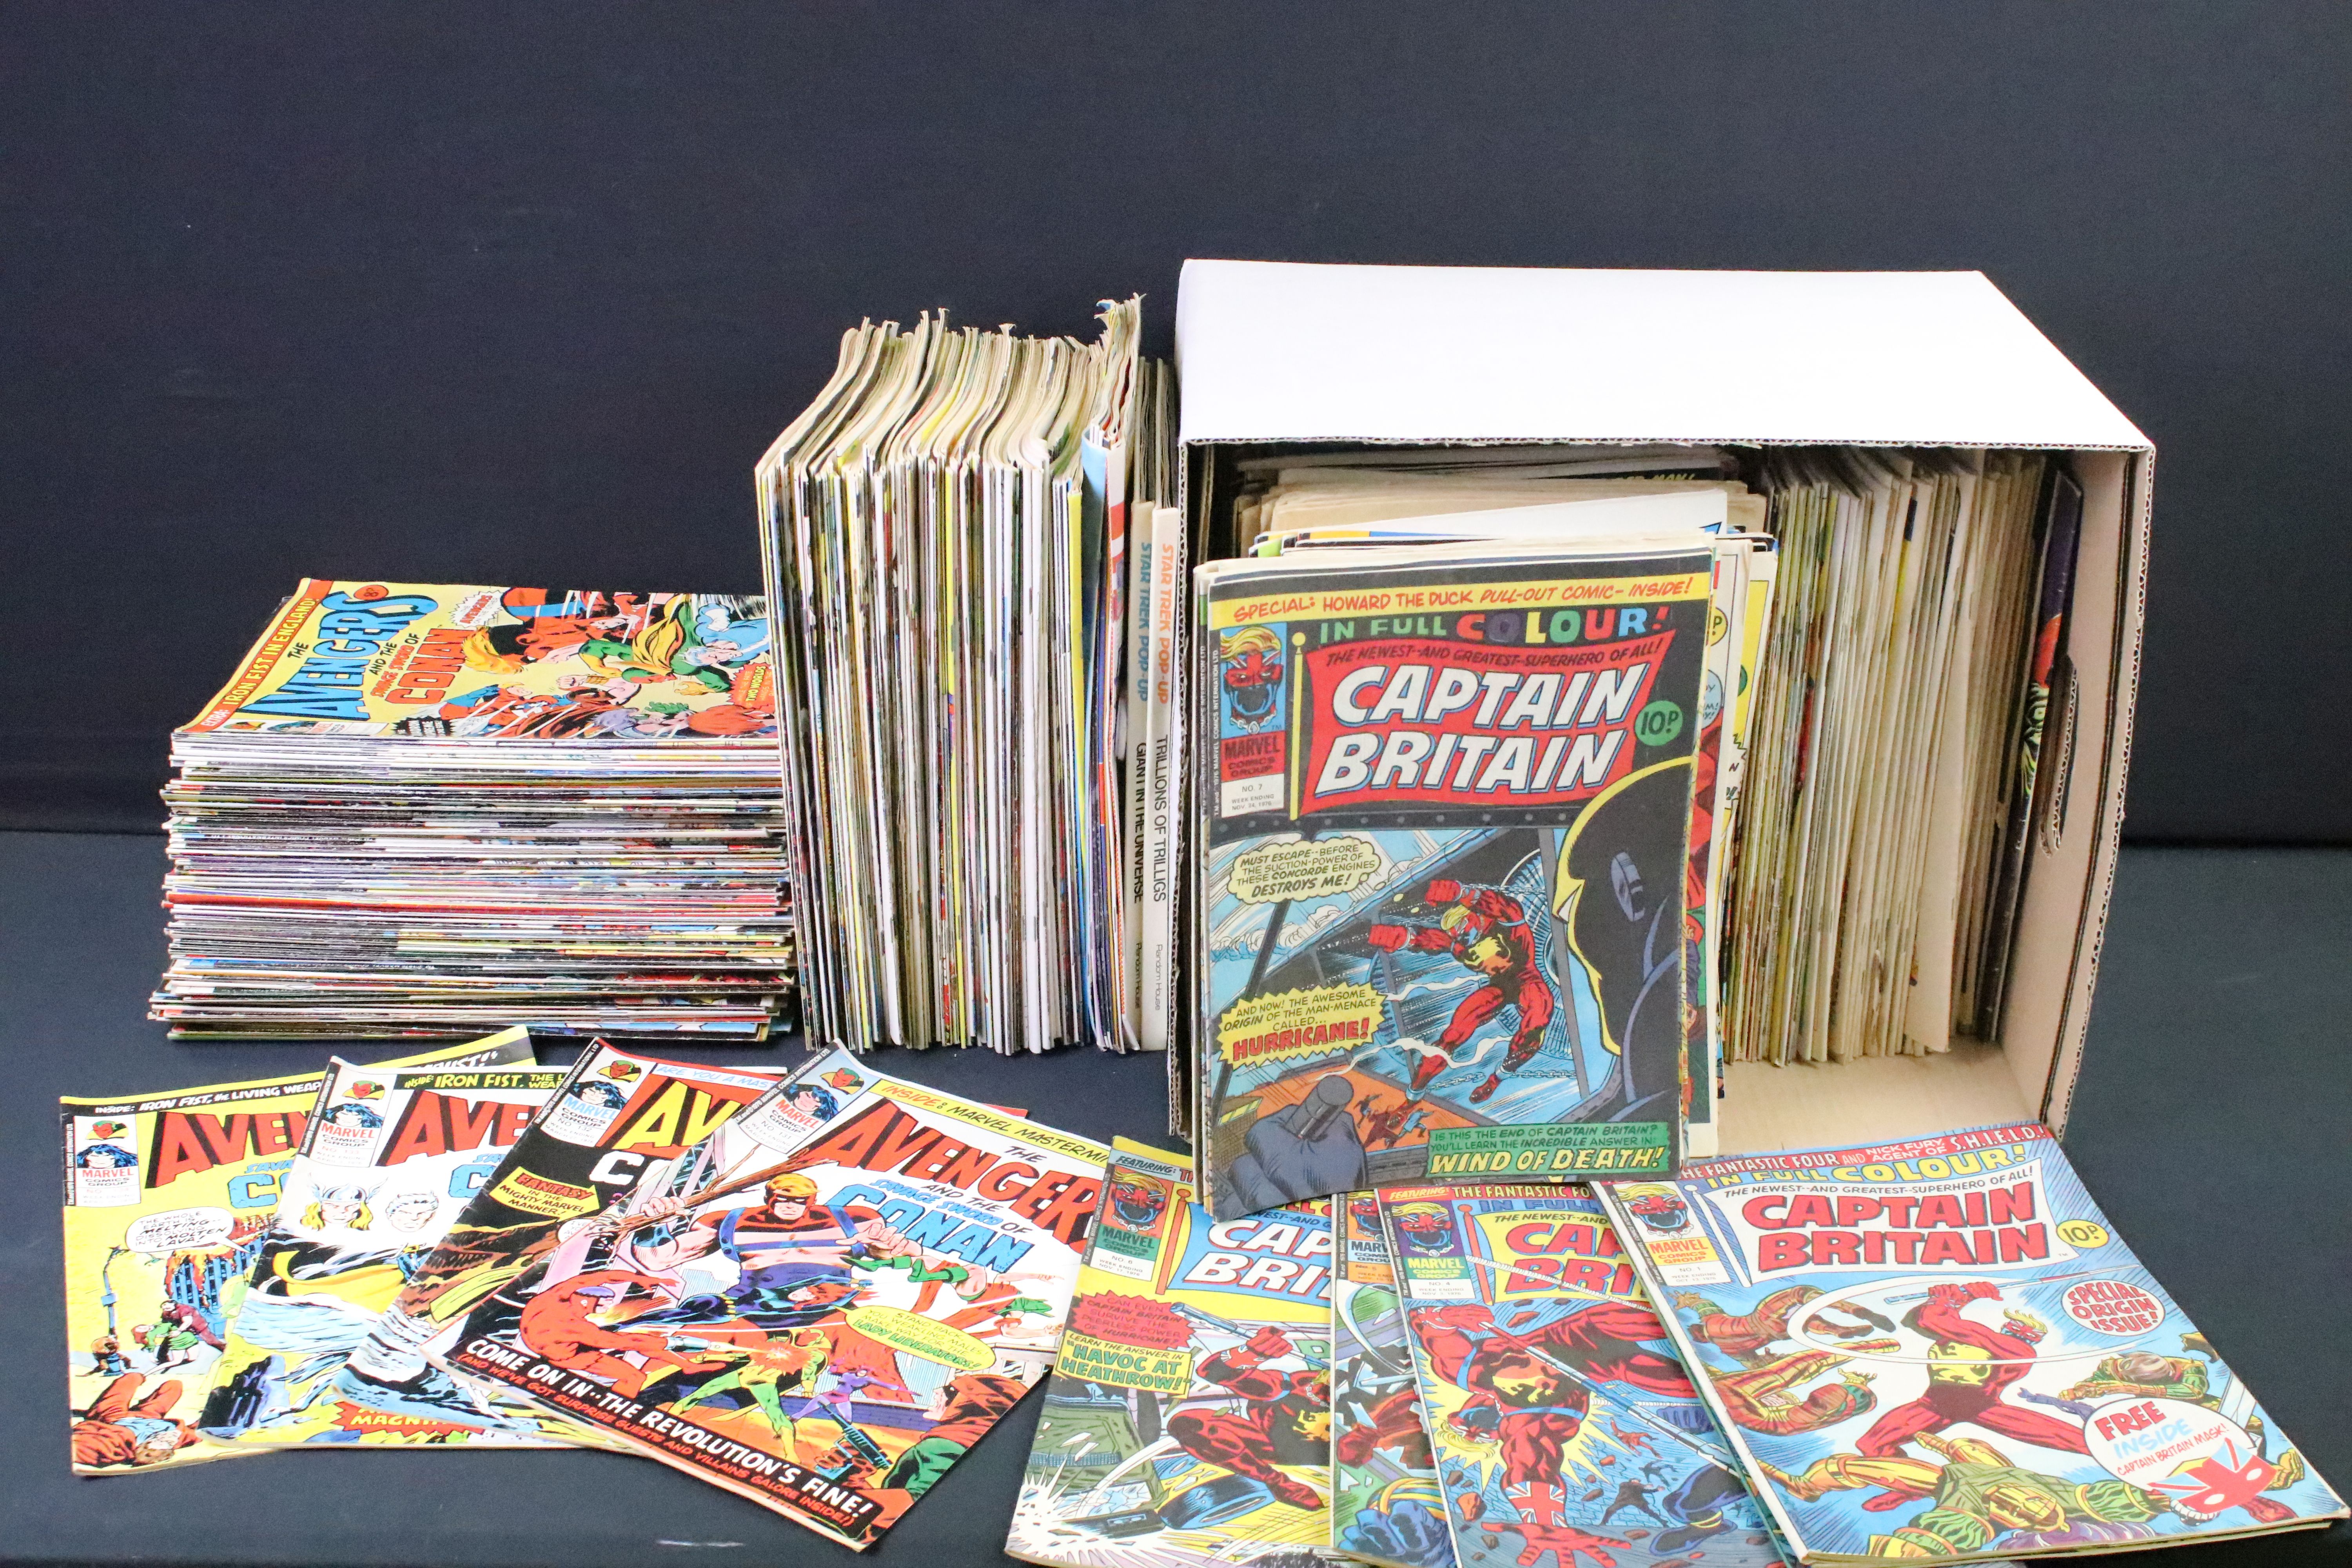 Comics - Large collection of various Marvel comics to include a complete run of The Avengers from